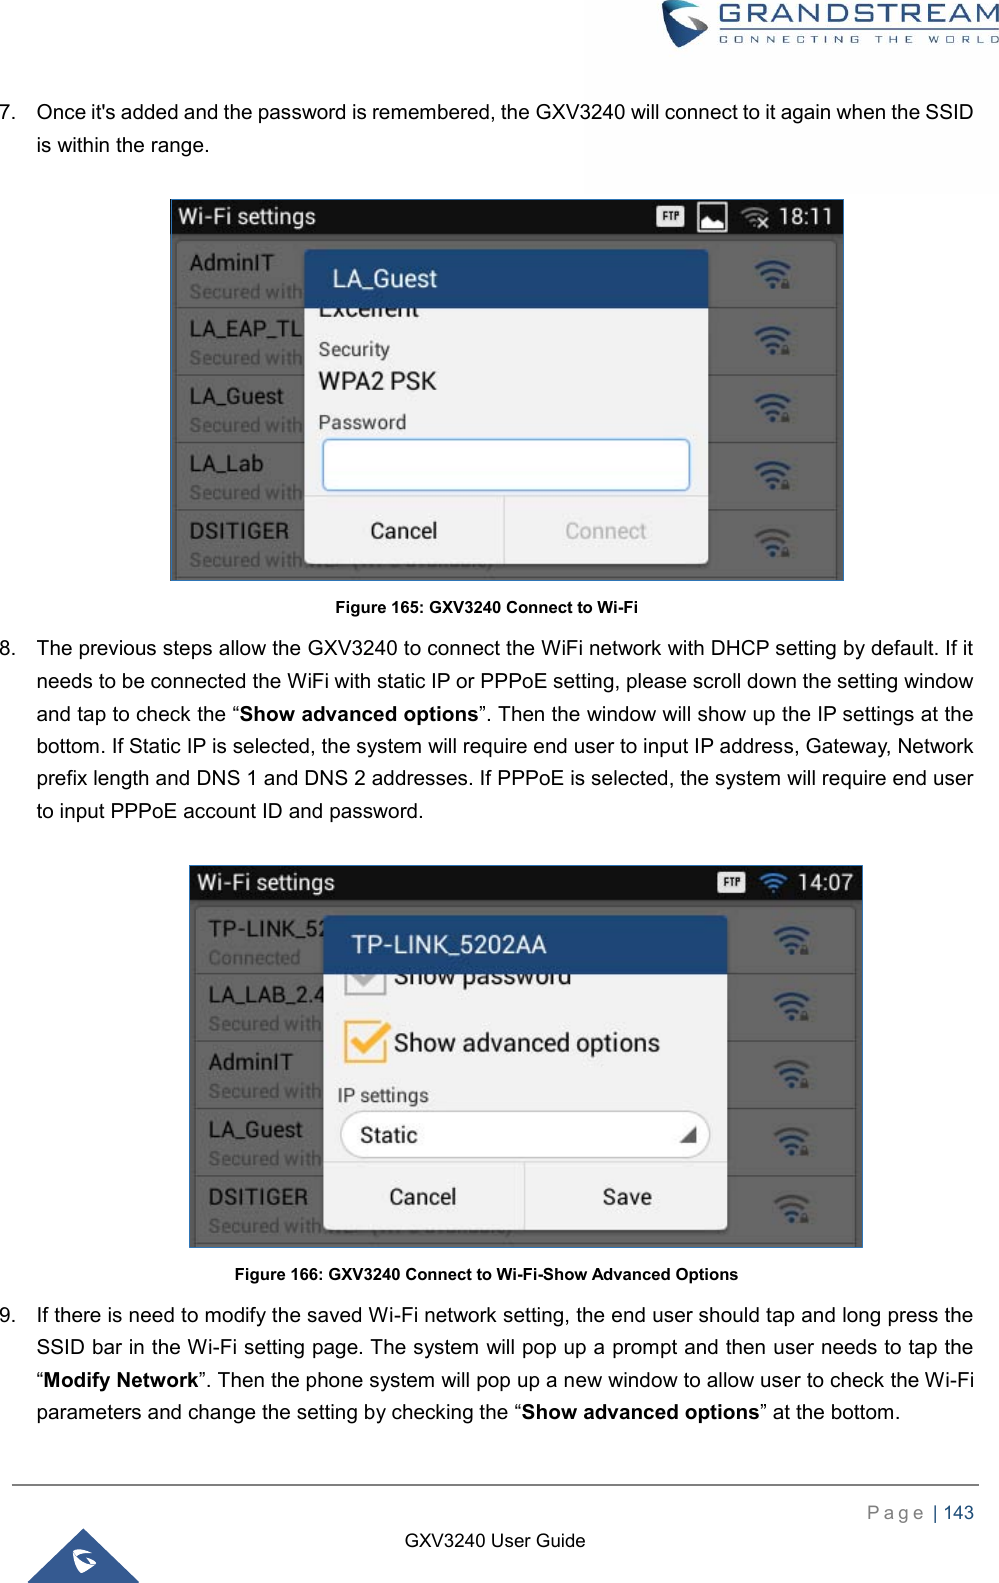    P a g e  | 143    GXV3240 User Guide  7.  Once it&apos;s added and the password is remembered, the GXV3240 will connect to it again when the SSID is within the range.   Figure 165: GXV3240 Connect to Wi-Fi 8.  The previous steps allow the GXV3240 to connect the WiFi network with DHCP setting by default. If it needs to be connected the WiFi with static IP or PPPoE setting, please scroll down the setting window and tap to check the “Show advanced options”. Then the window will show up the IP settings at the bottom. If Static IP is selected, the system will require end user to input IP address, Gateway, Network prefix length and DNS 1 and DNS 2 addresses. If PPPoE is selected, the system will require end user to input PPPoE account ID and password.   Figure 166: GXV3240 Connect to Wi-Fi-Show Advanced Options 9.  If there is need to modify the saved Wi-Fi network setting, the end user should tap and long press the SSID bar in the Wi-Fi setting page. The system will pop up a prompt and then user needs to tap the “Modify Network”. Then the phone system will pop up a new window to allow user to check the Wi-Fi parameters and change the setting by checking the “Show advanced options” at the bottom. 